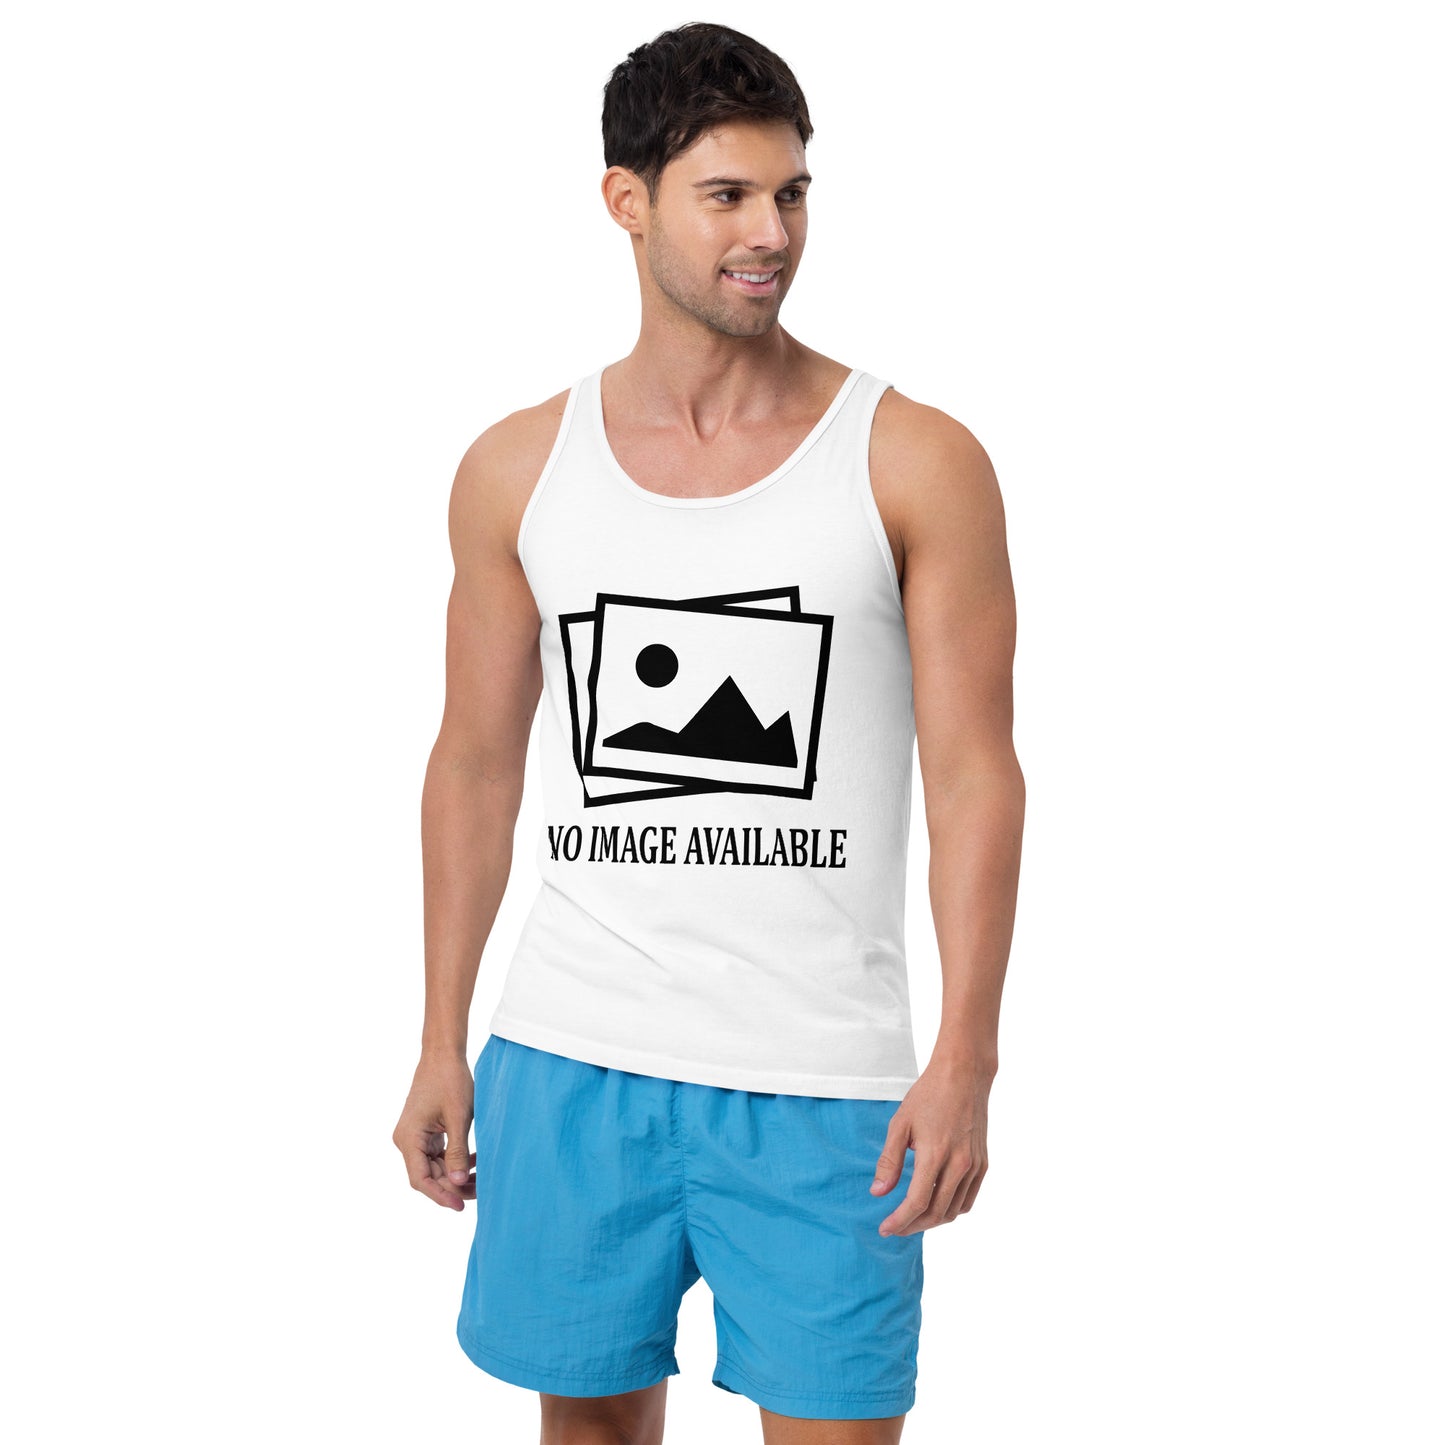 Men with white tank top with image and text "no image available"